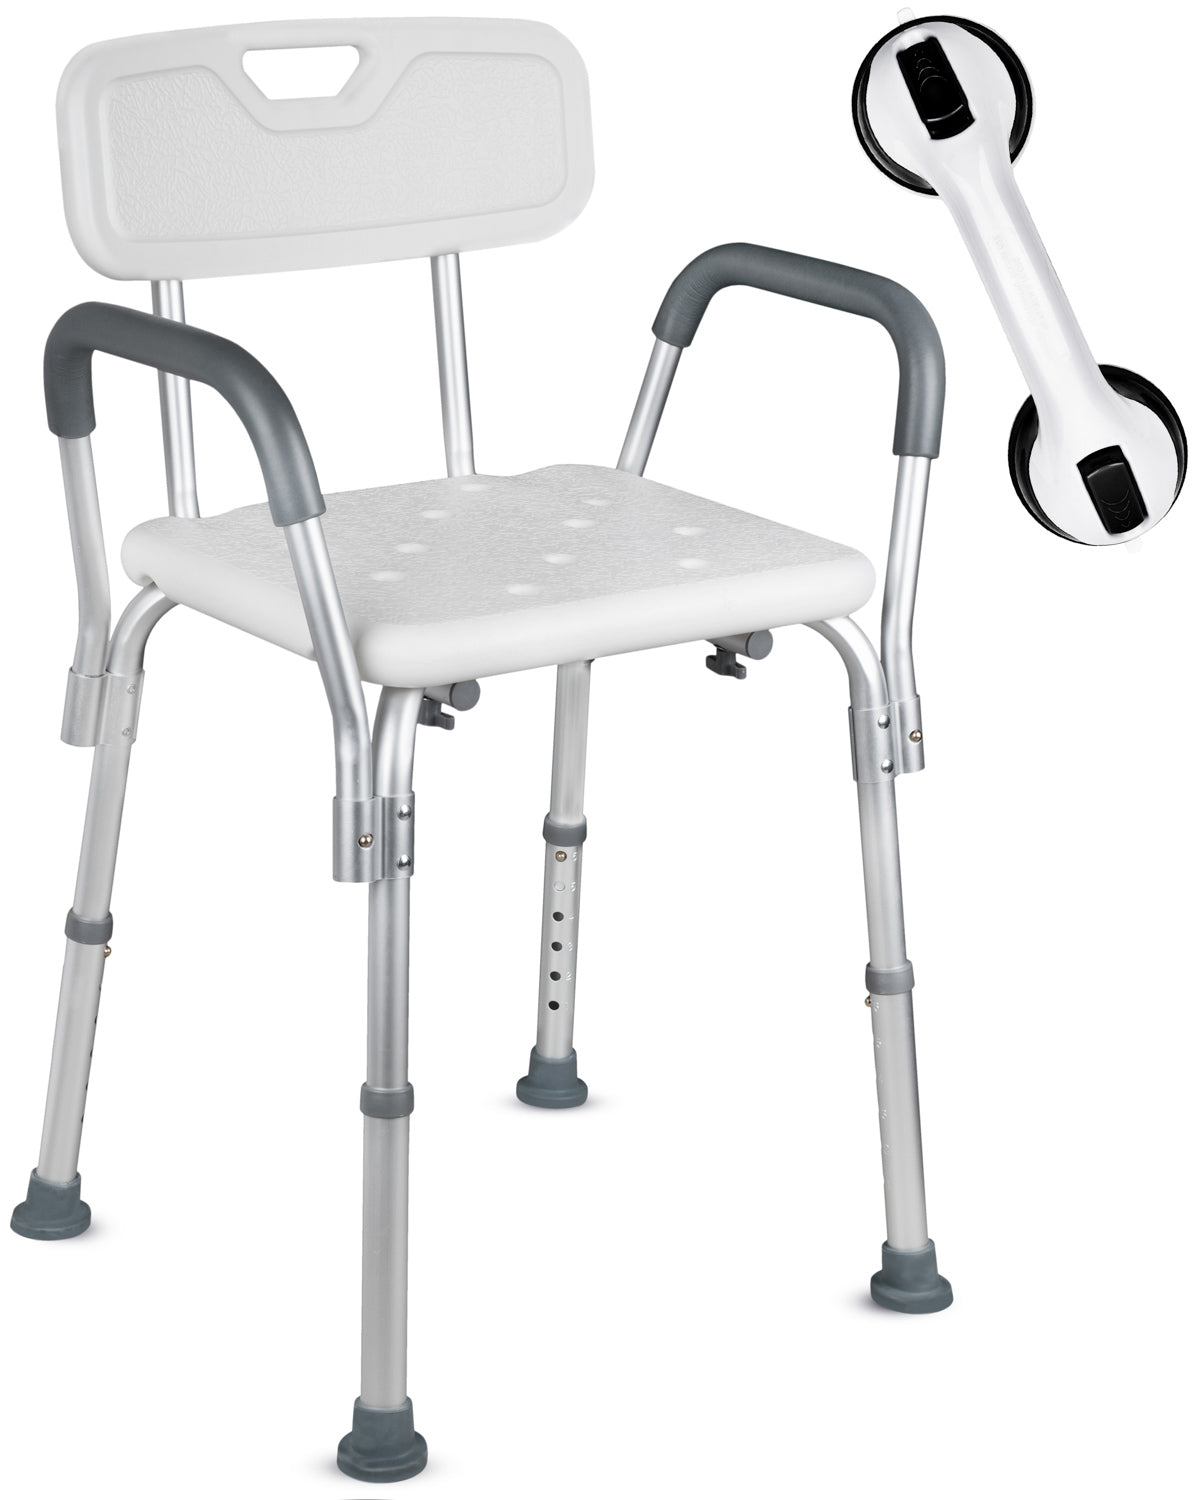 Homecraft Padded Back Shower Chair with Arms for Elderly and